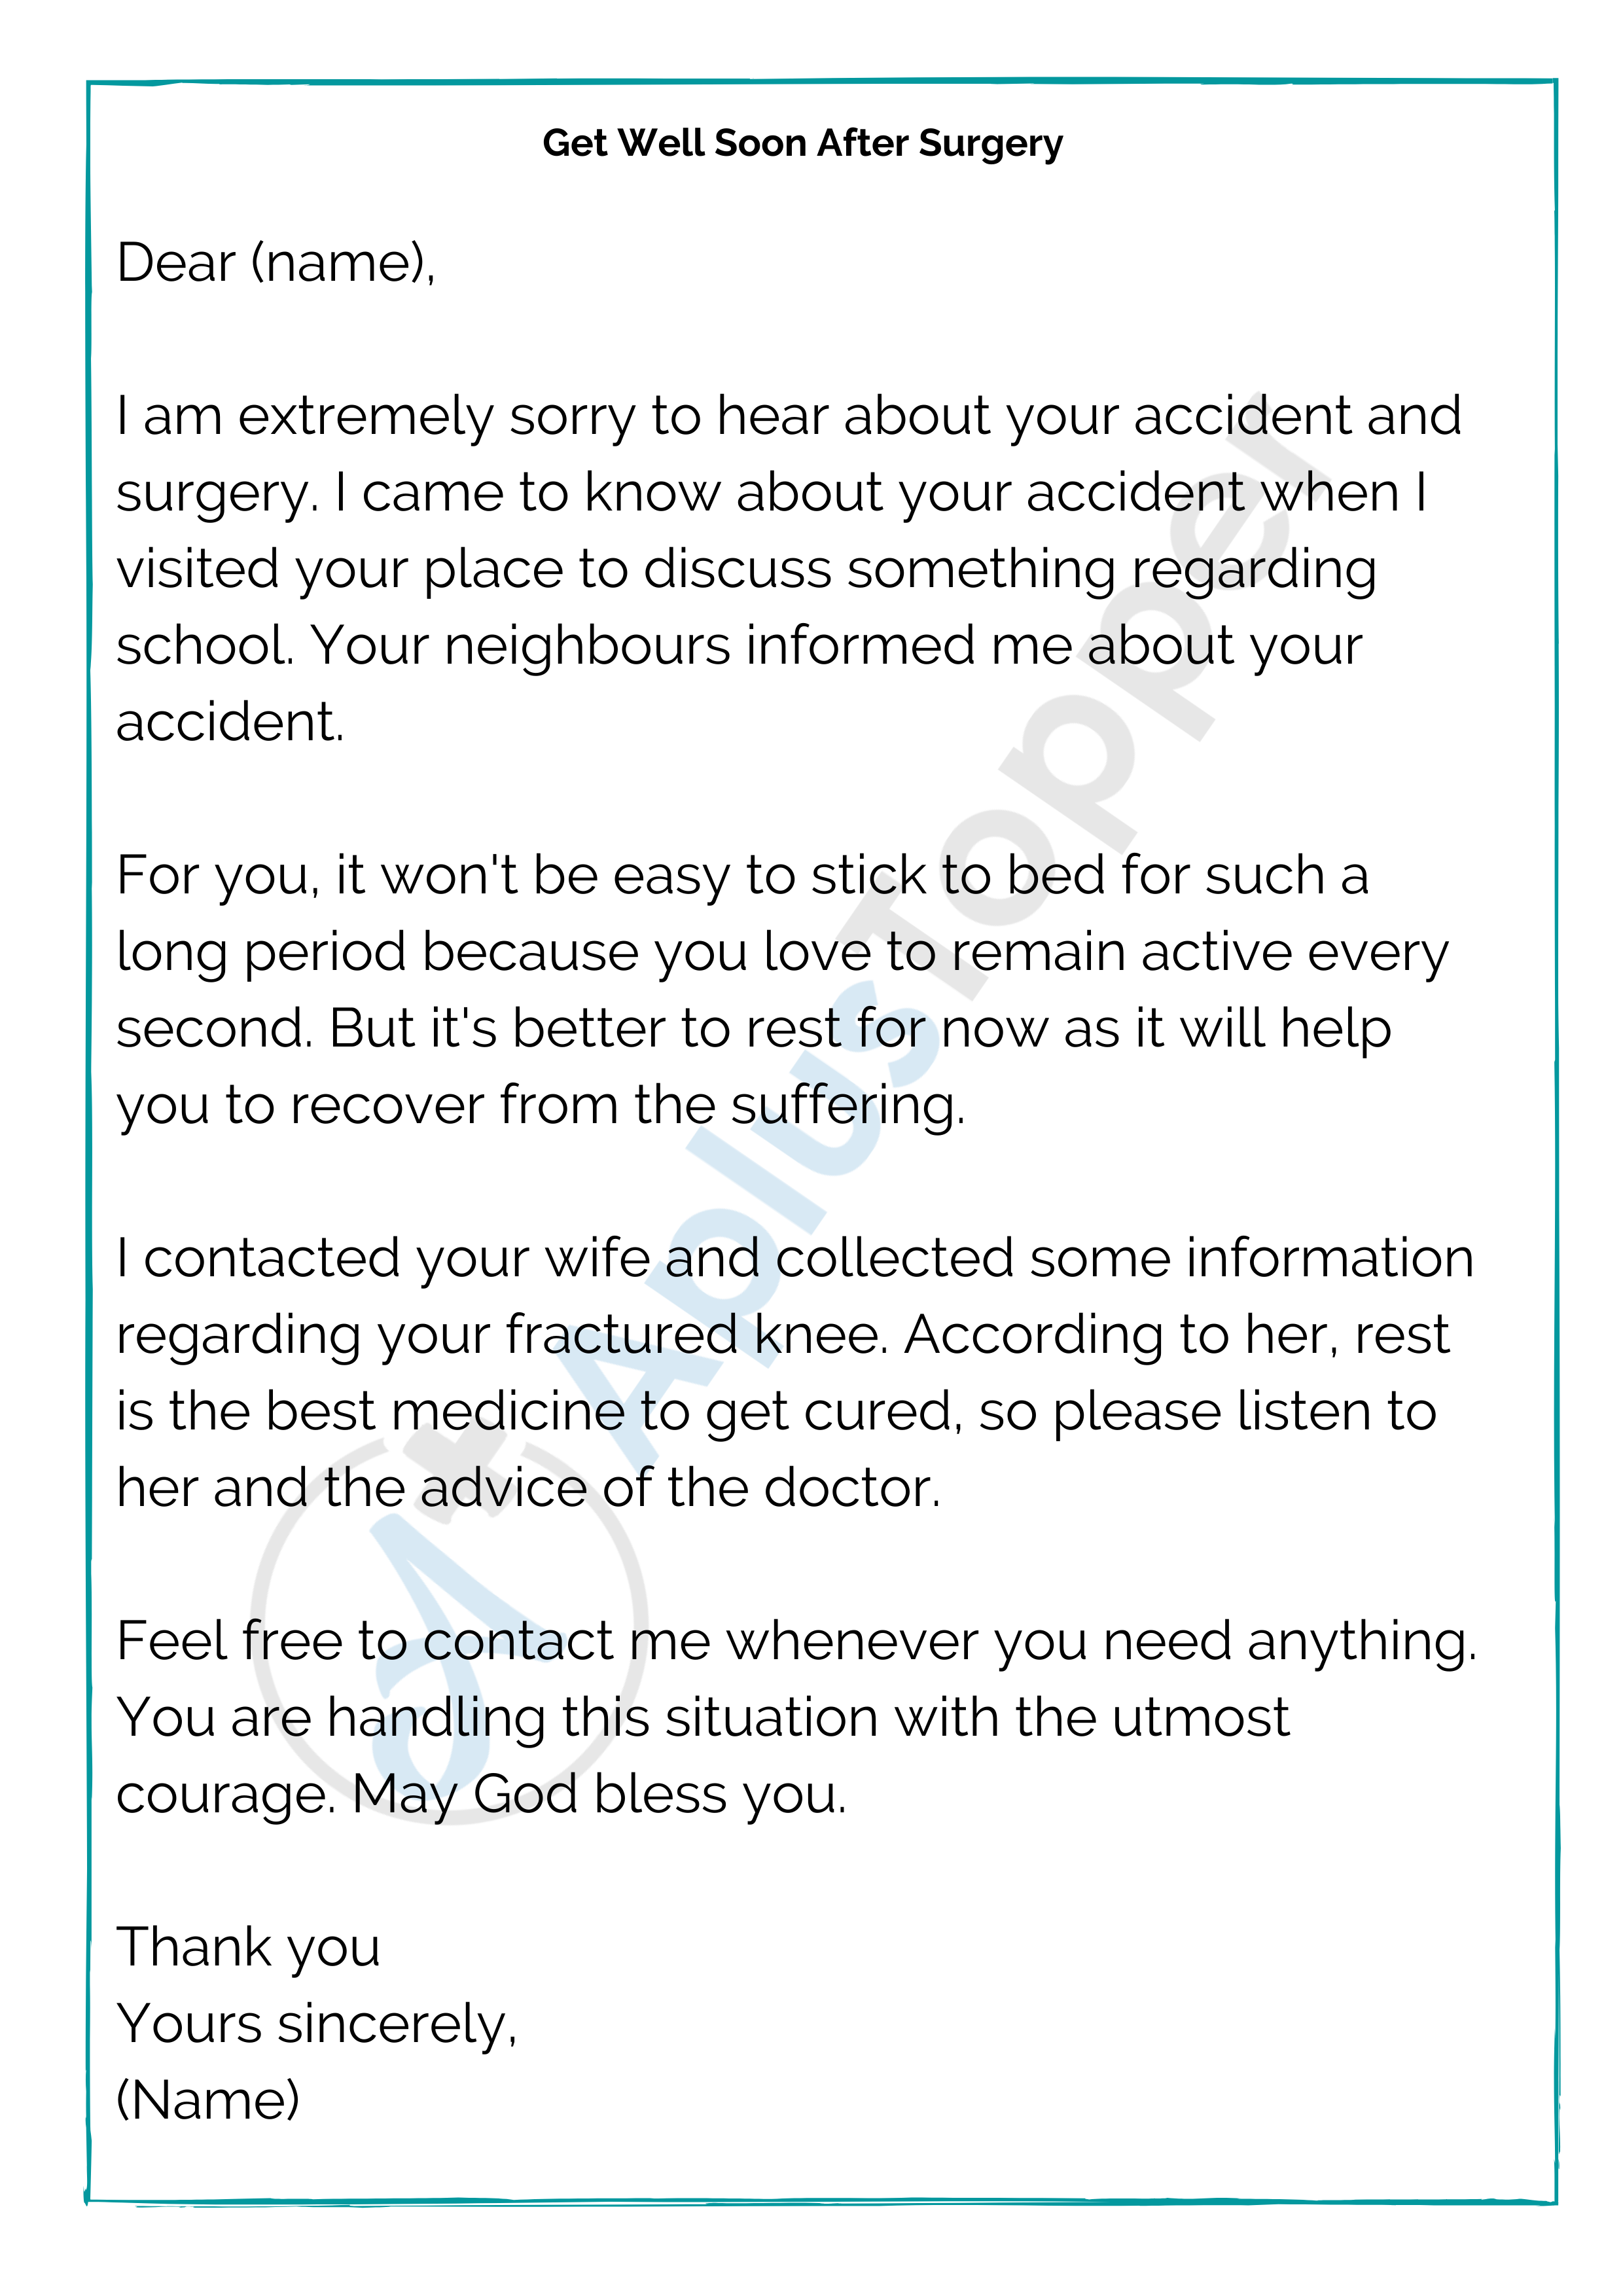 23+ Sample Get Well Soon Letters  Format and How To Write Get Well